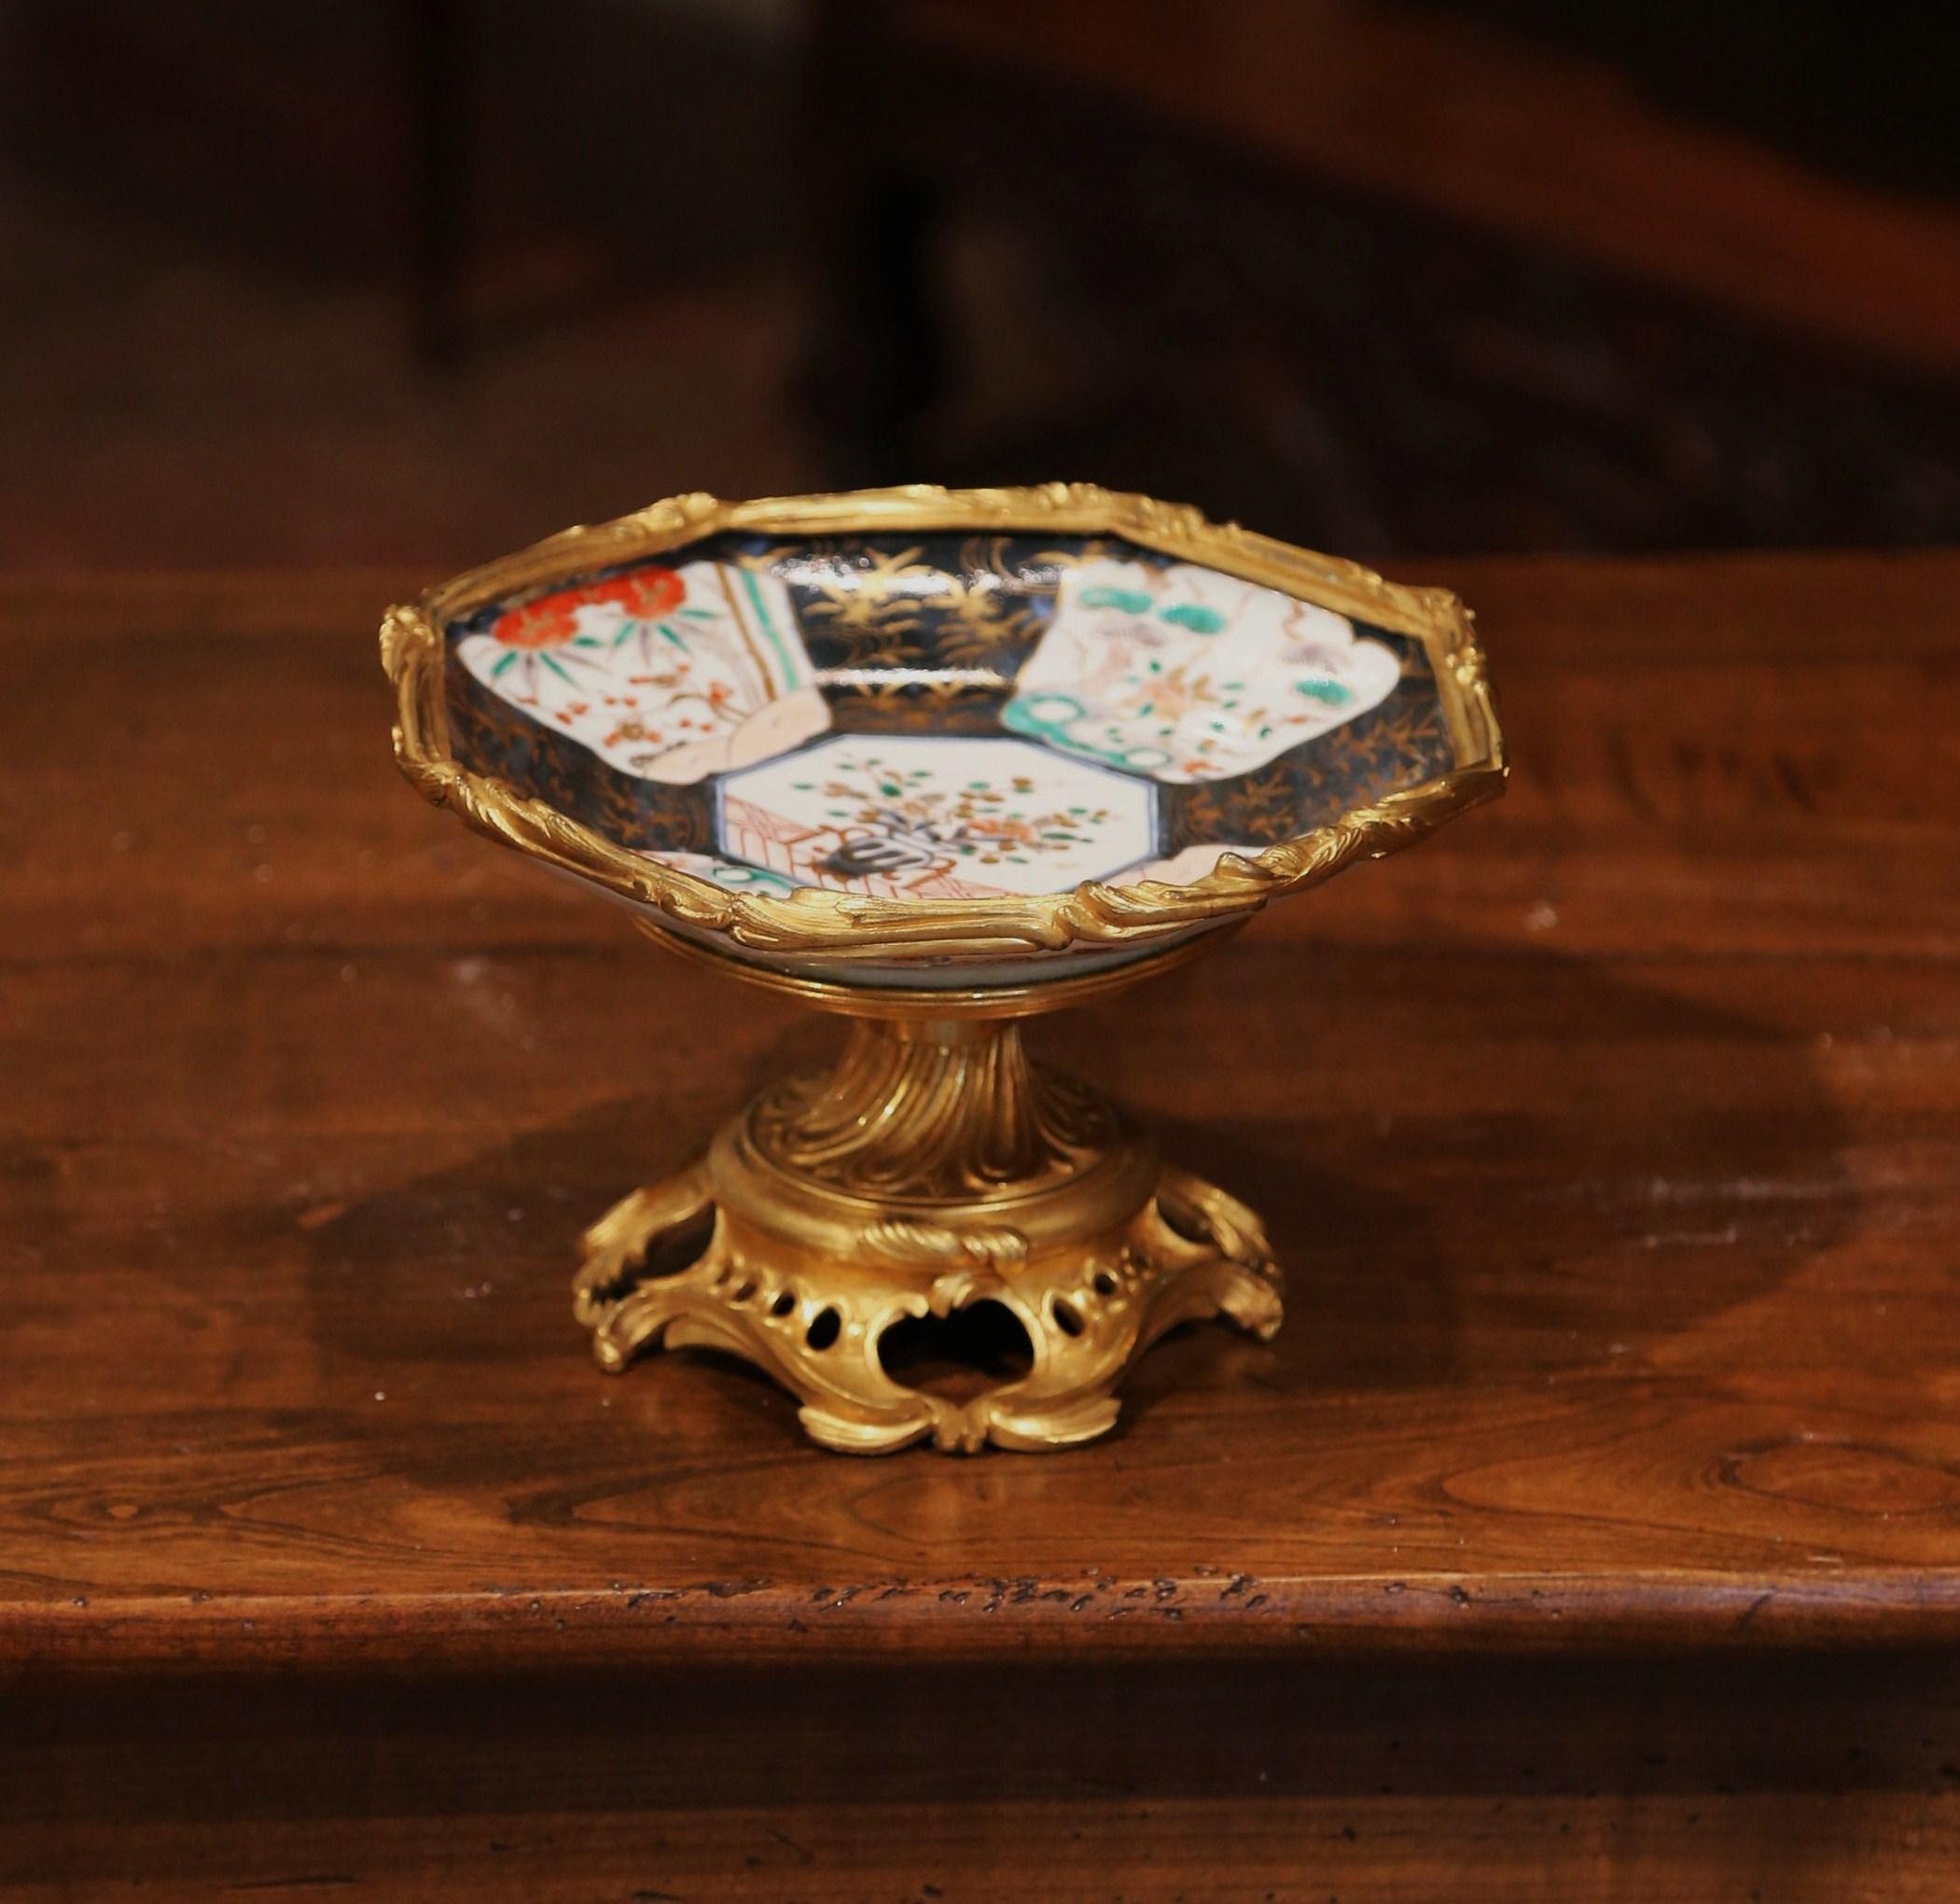 Gilt 19th Century Japanese Painted Imari Shall Bowl with Mounts on Bronze Dore Stand For Sale